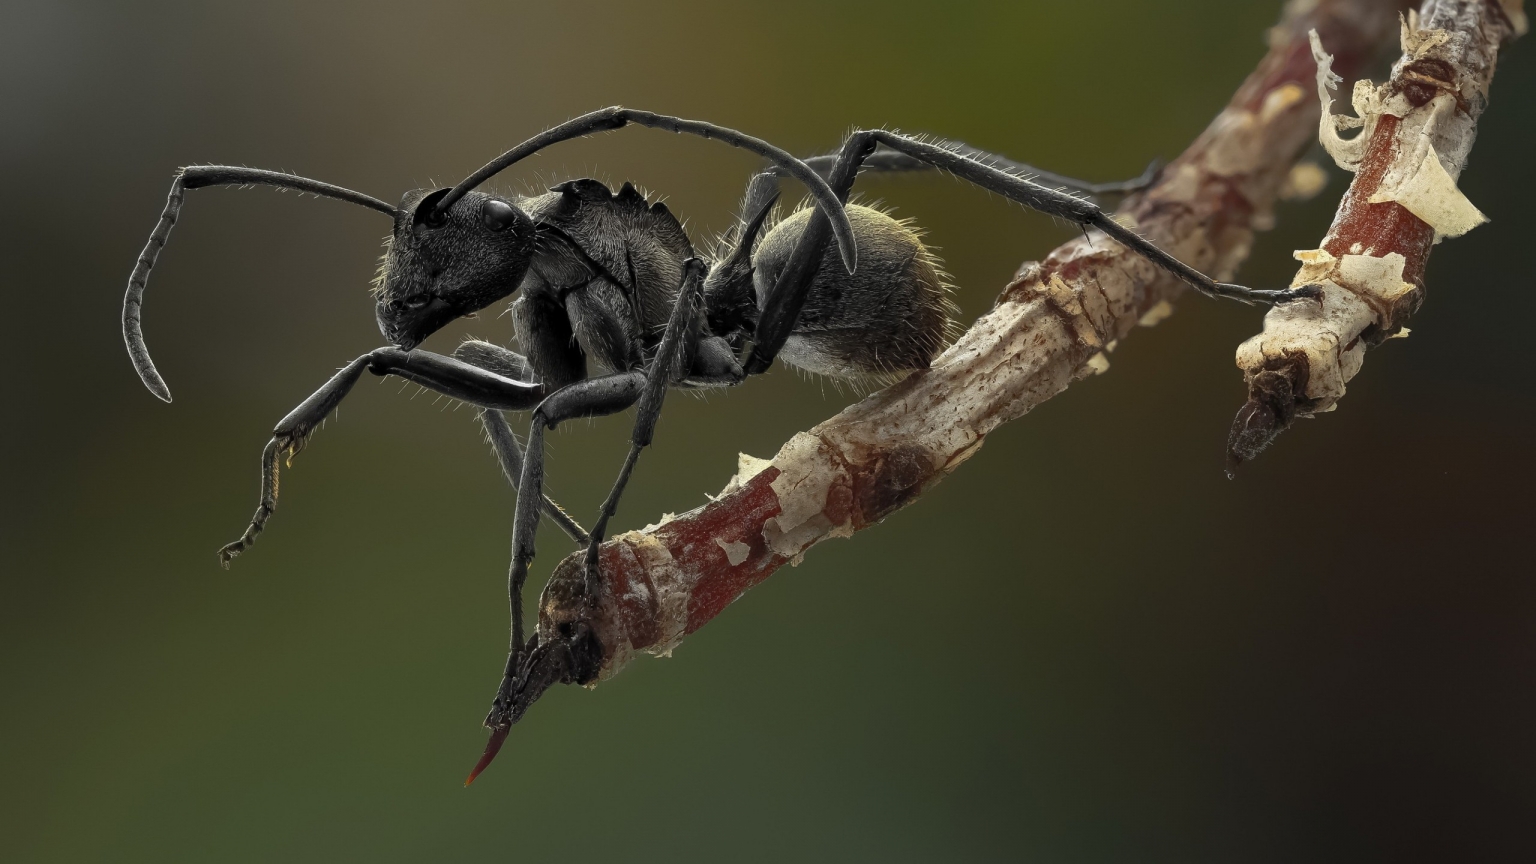 Ant Macro Photography for 1536 x 864 HDTV resolution